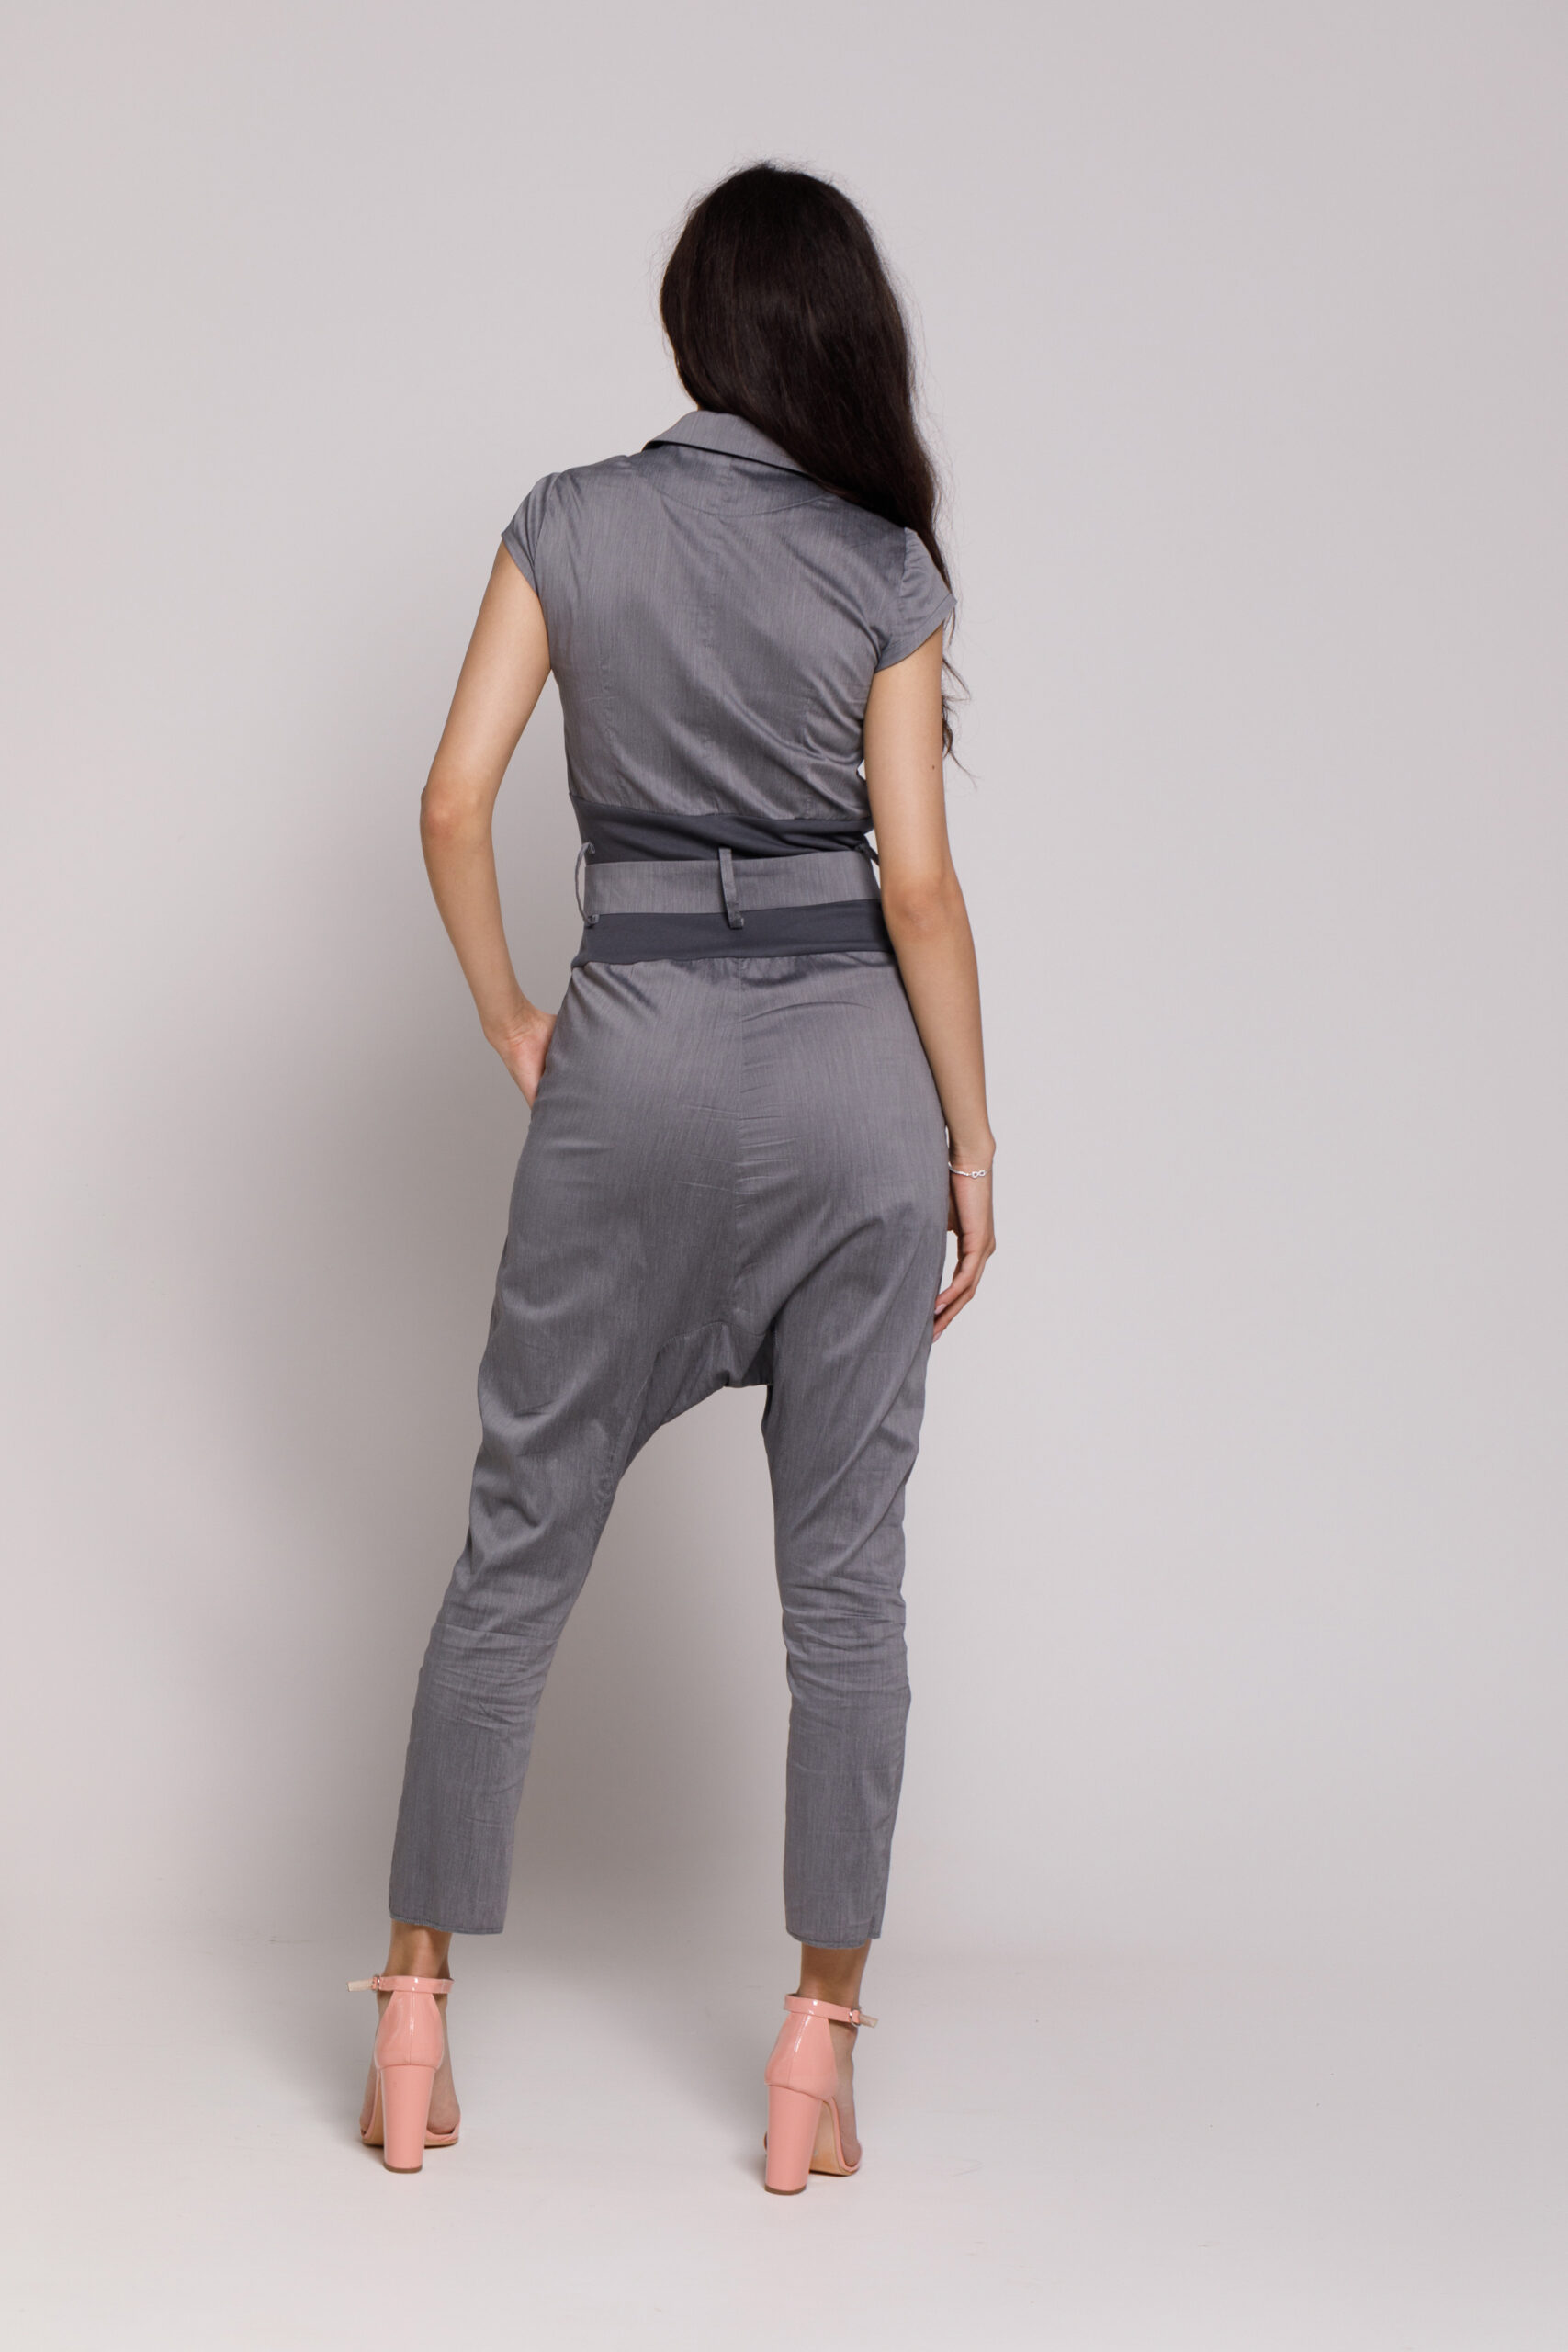 ALIS casual jumpsuit in poplin and gray jersey. Natural fabrics, original design, handmade embroidery